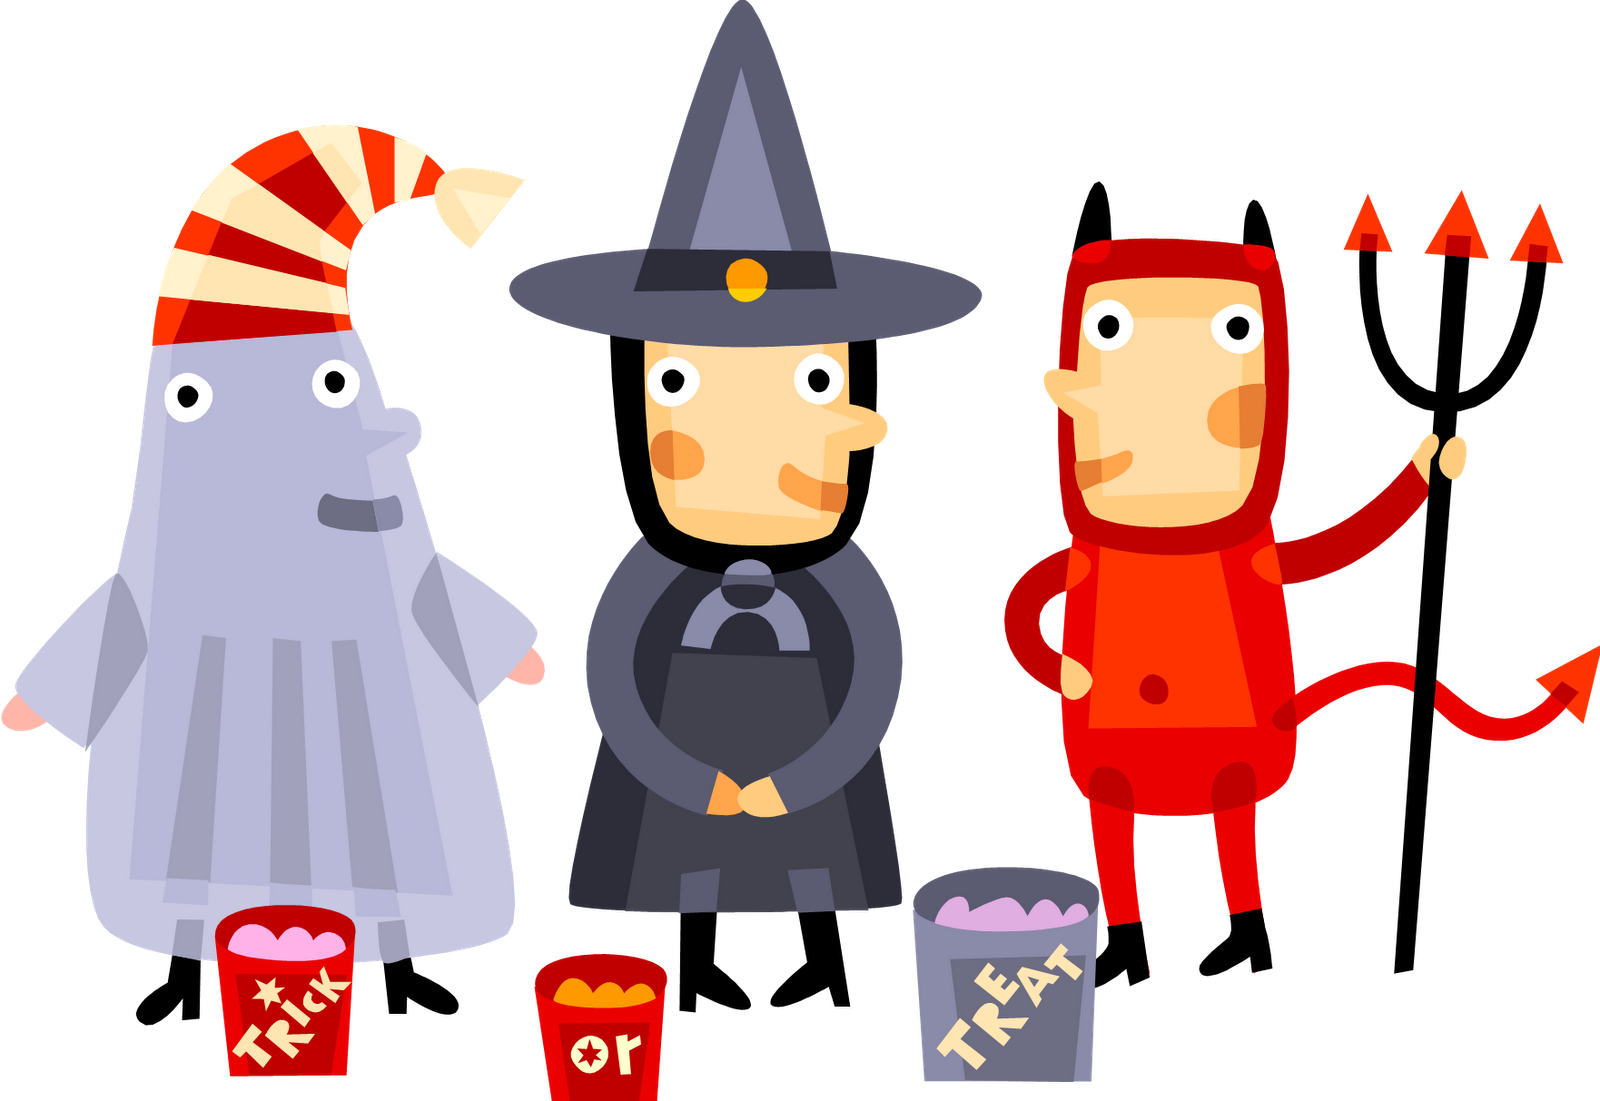 Halloween clipart for kids | ClipartMonk - Free Clip Art Images